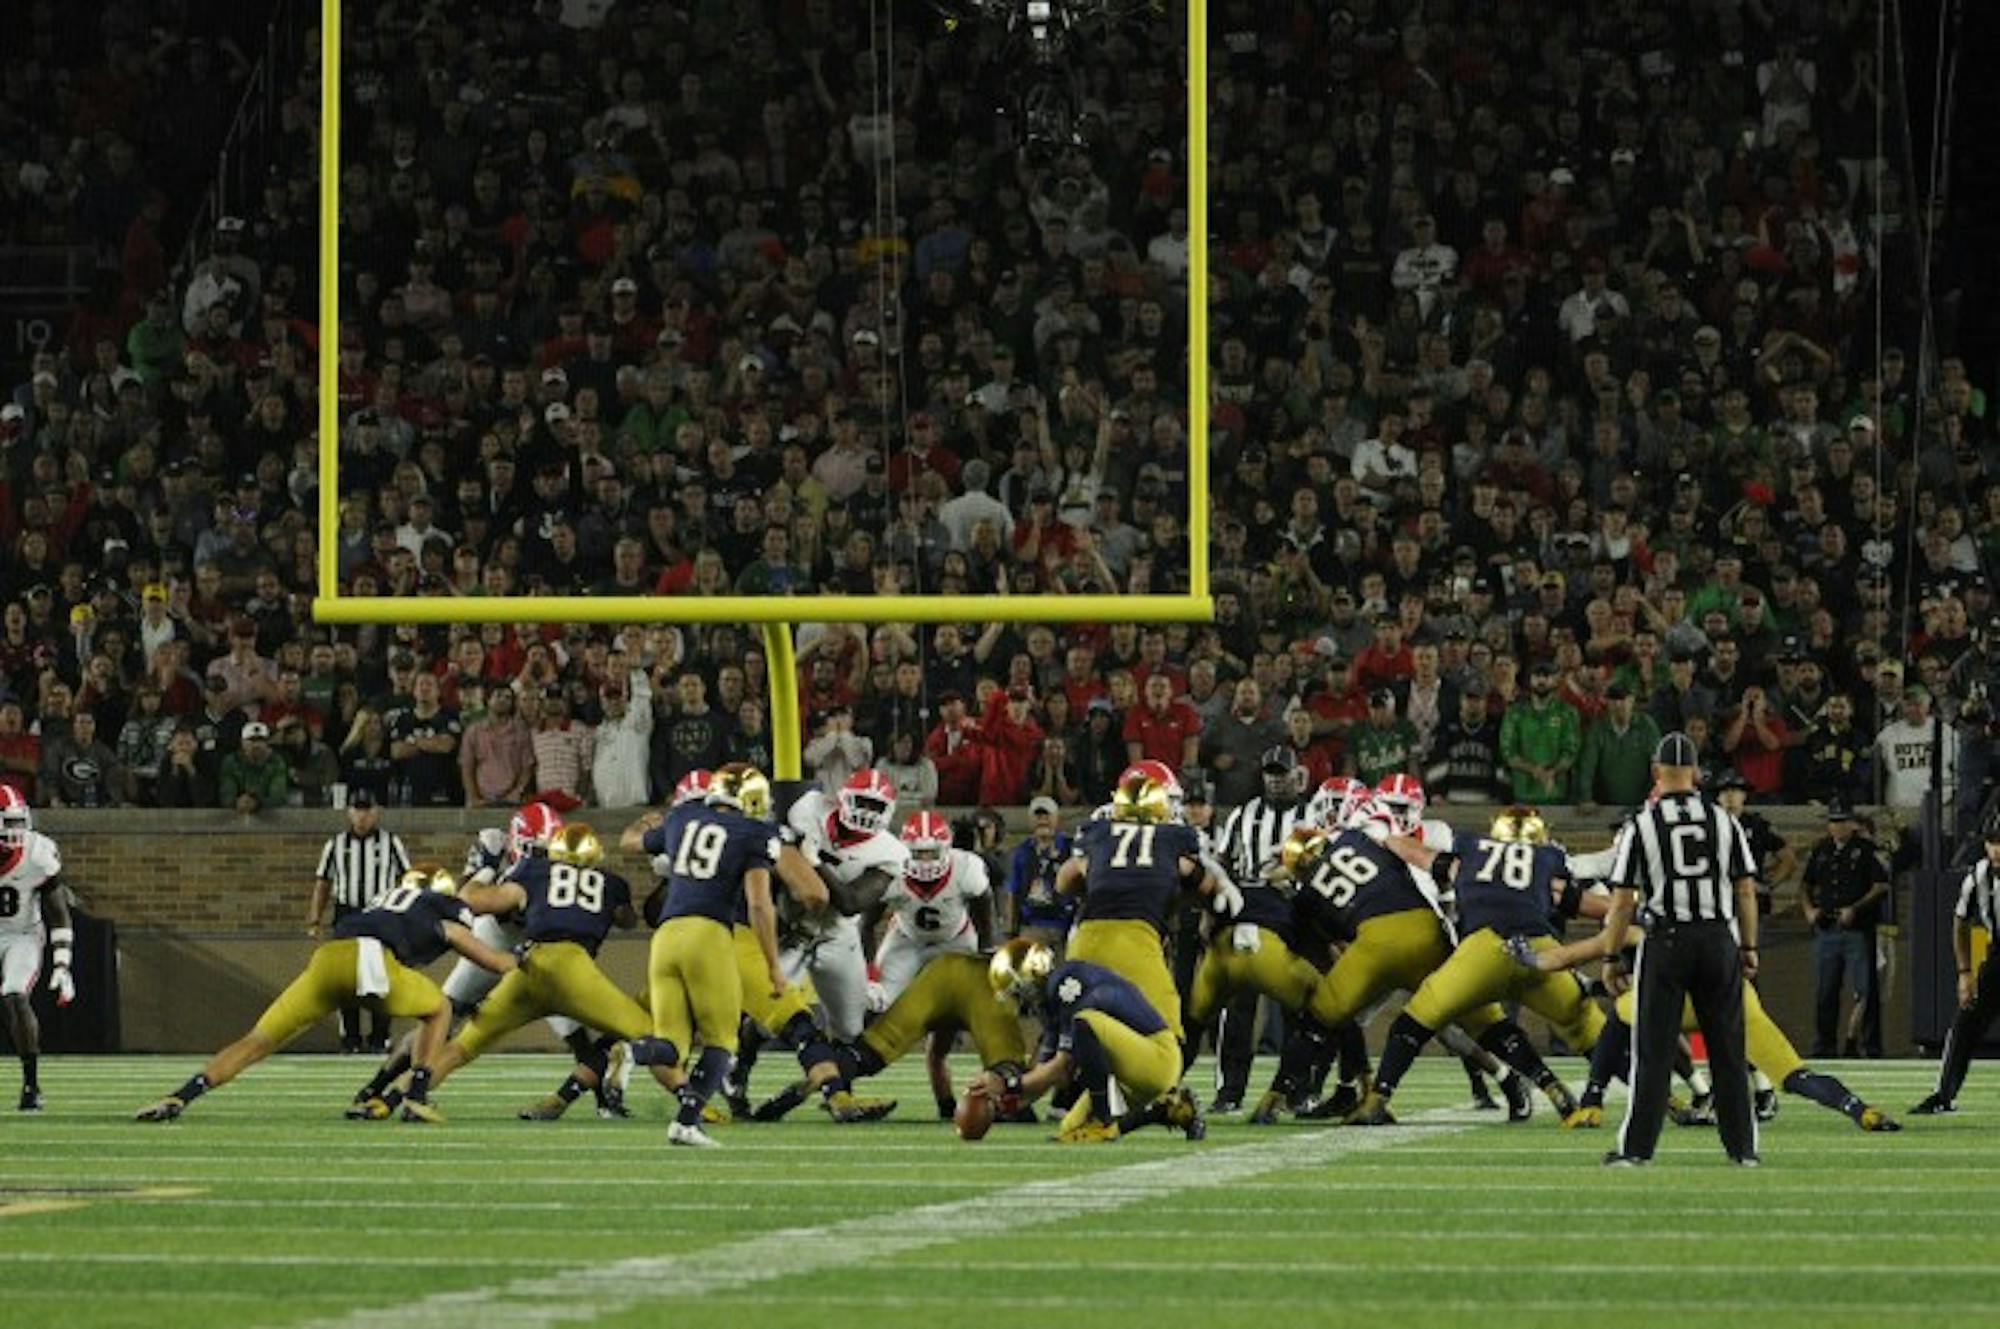 Irish junior Justin Yoon kicks a field goal during Notre Dame's 20-19 loss to Georgia on Saturday at Notre Dame Stadium. Yoon was 4-for-4 on the day kicking.